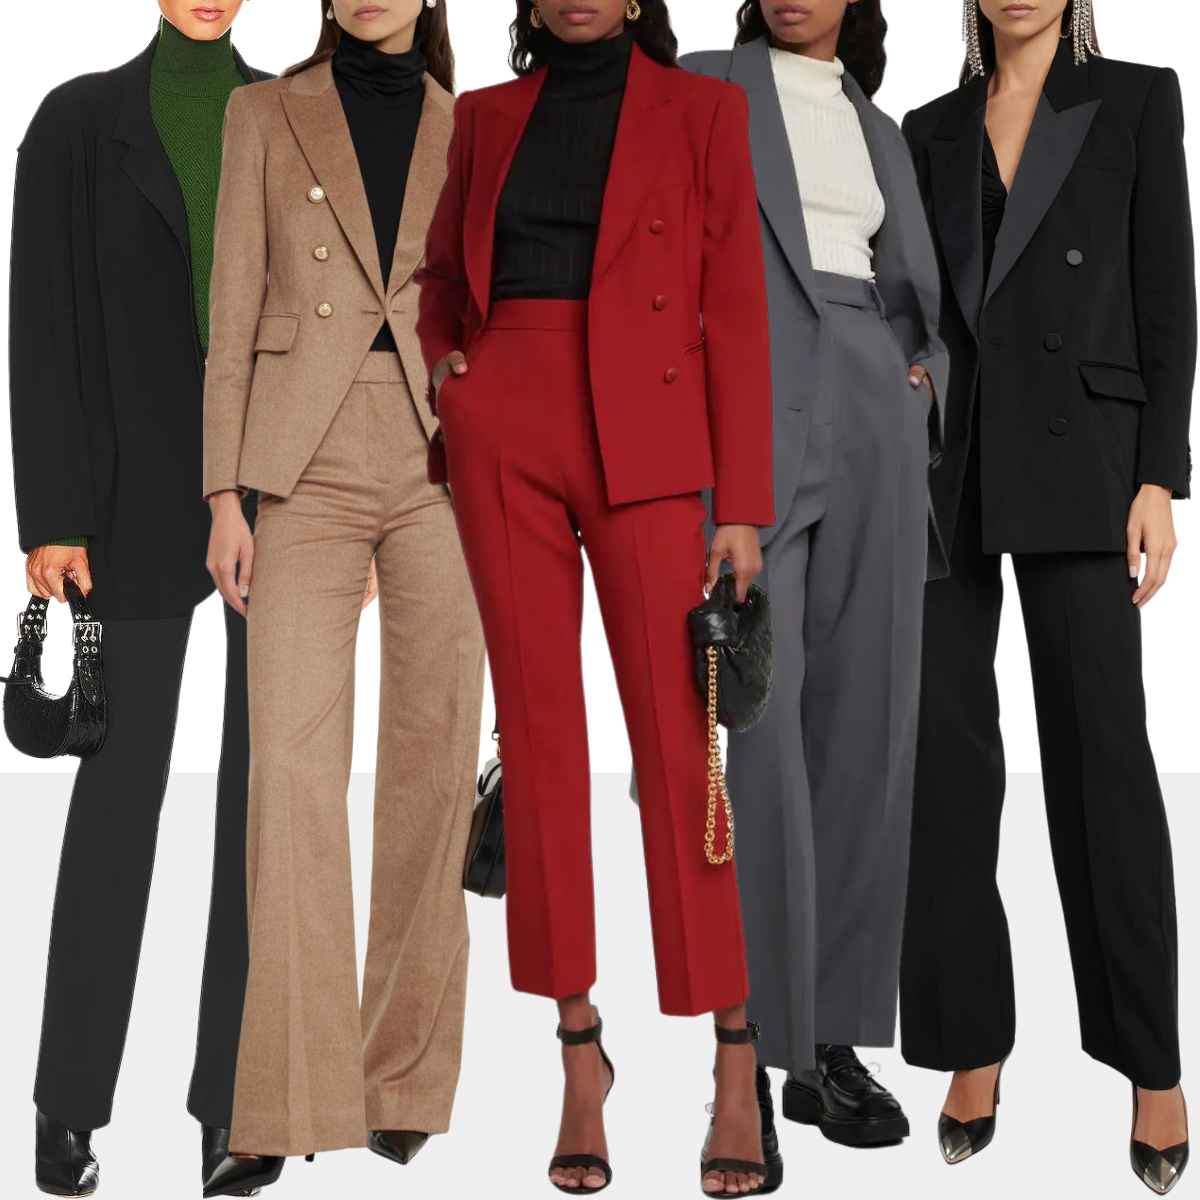 Collage of 5 women wearing various pantsuits with black shoes.